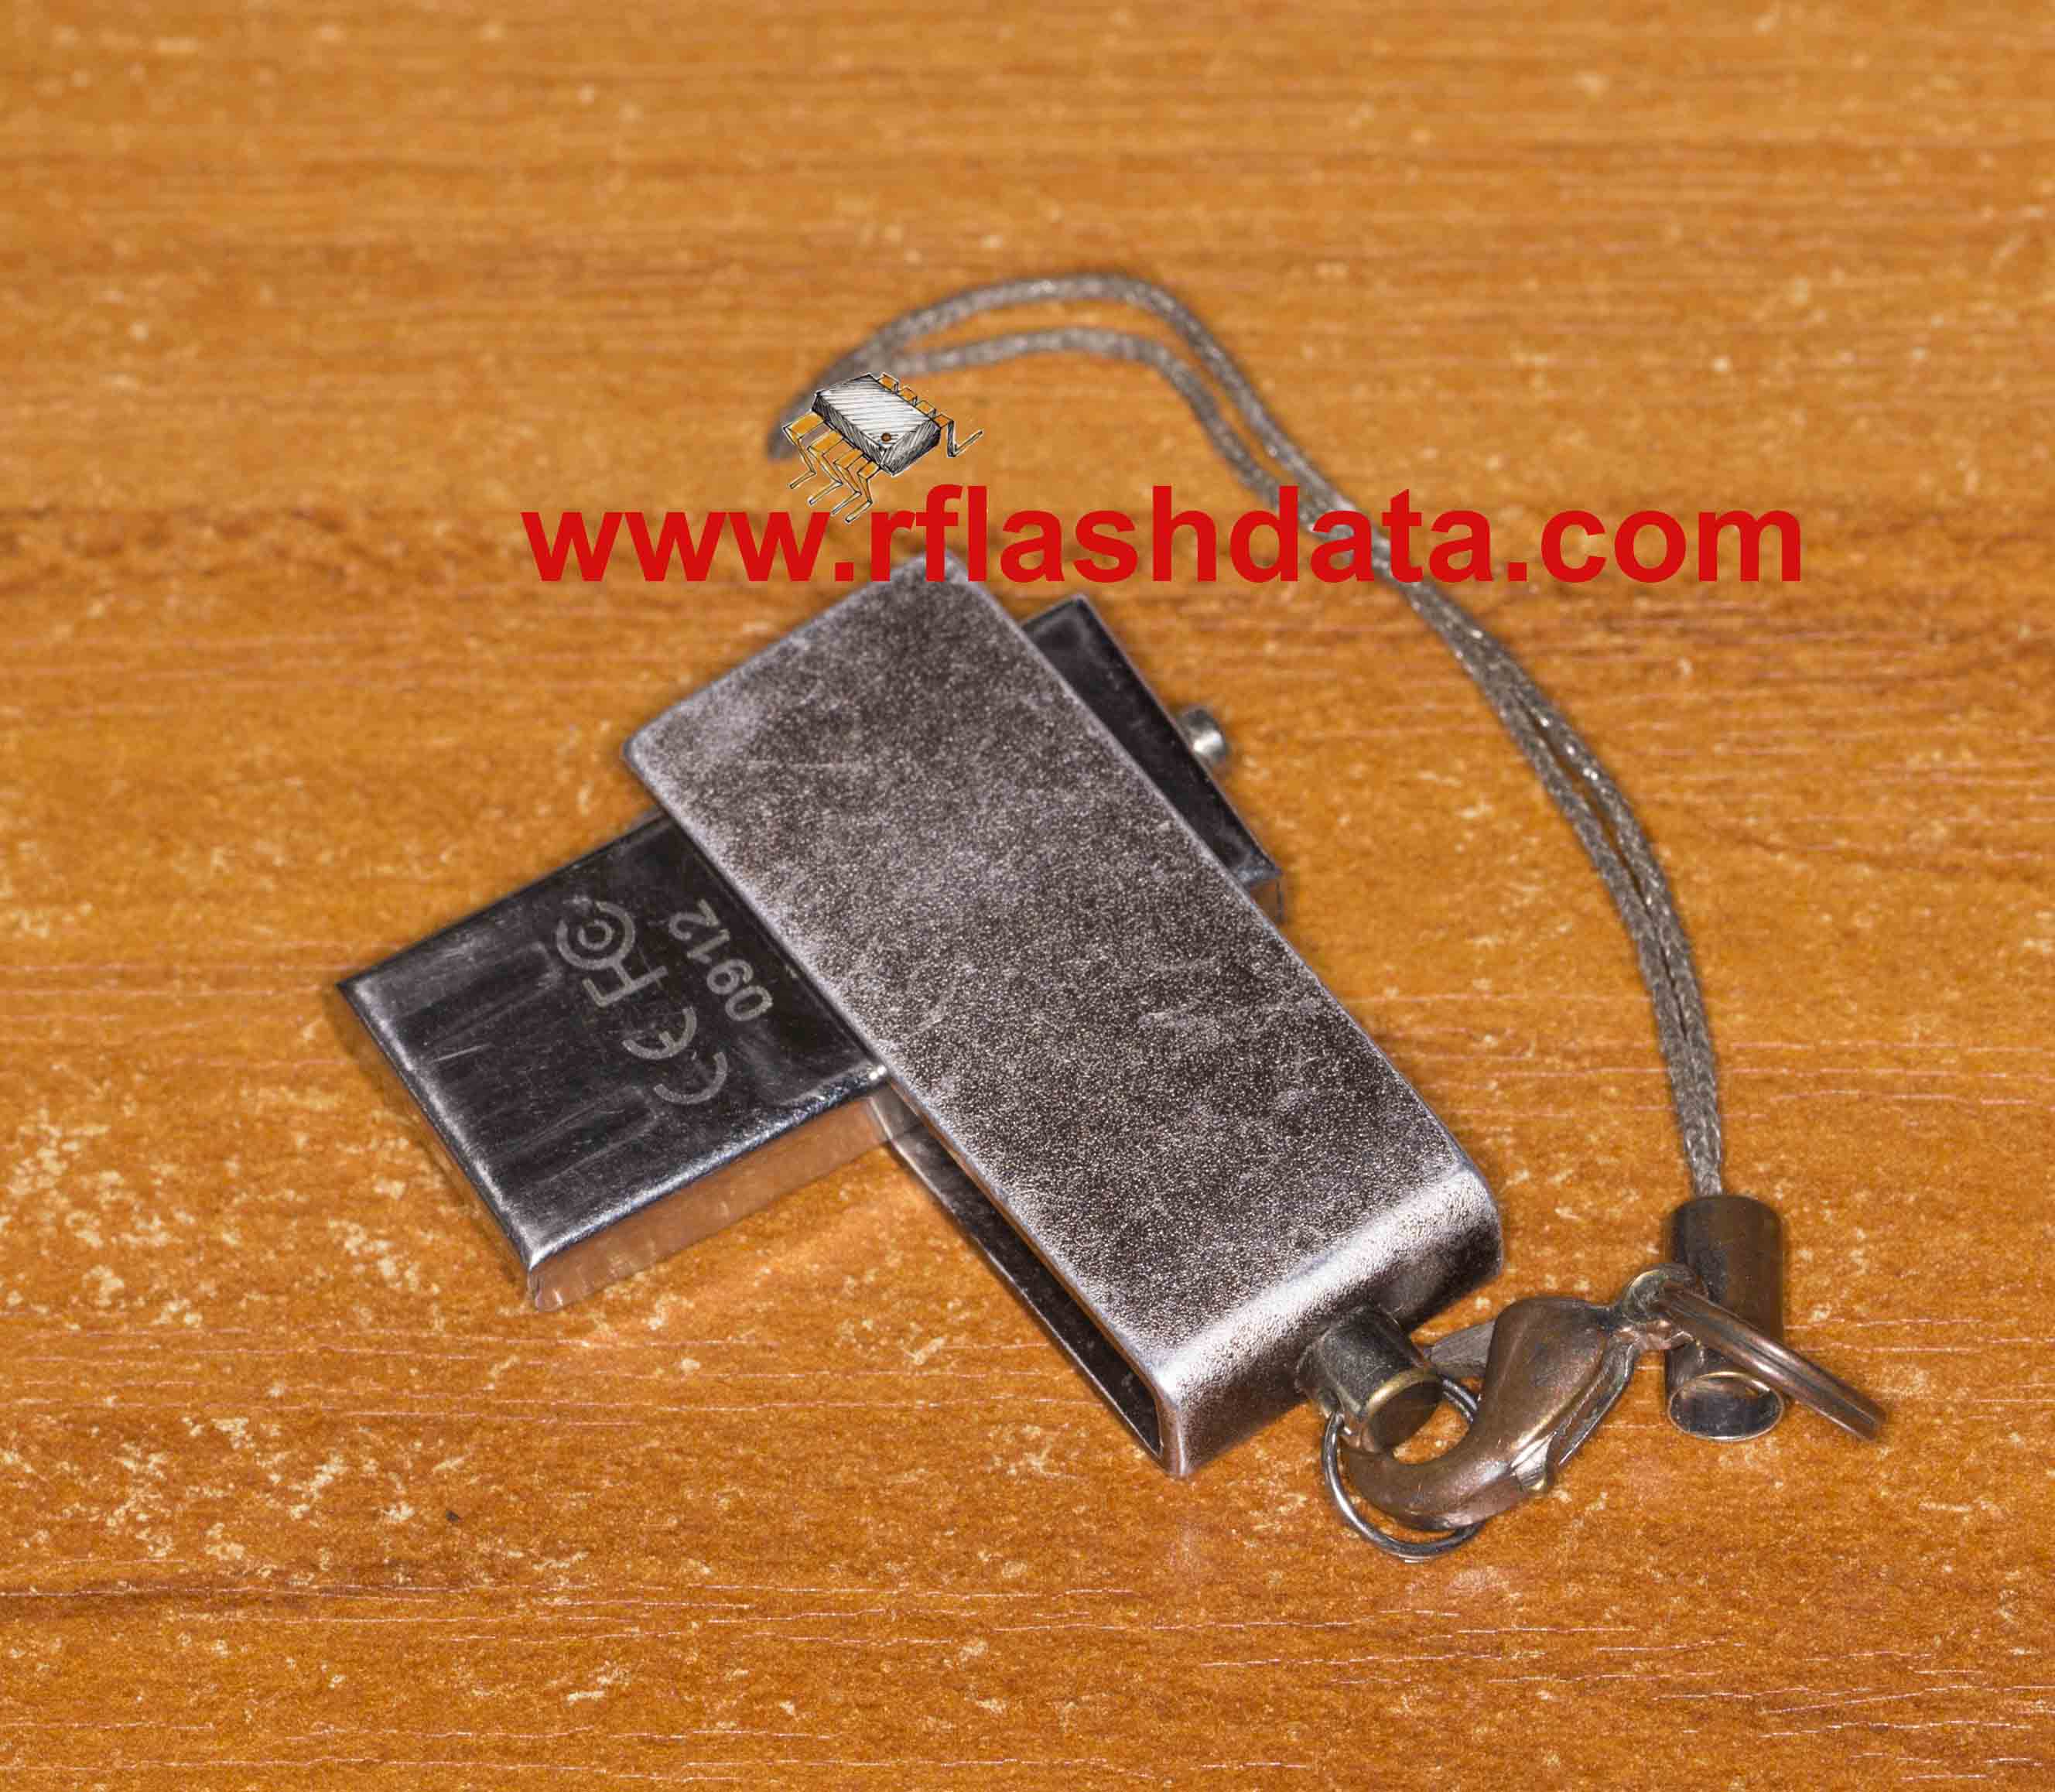 PNY Flash drive data recovery